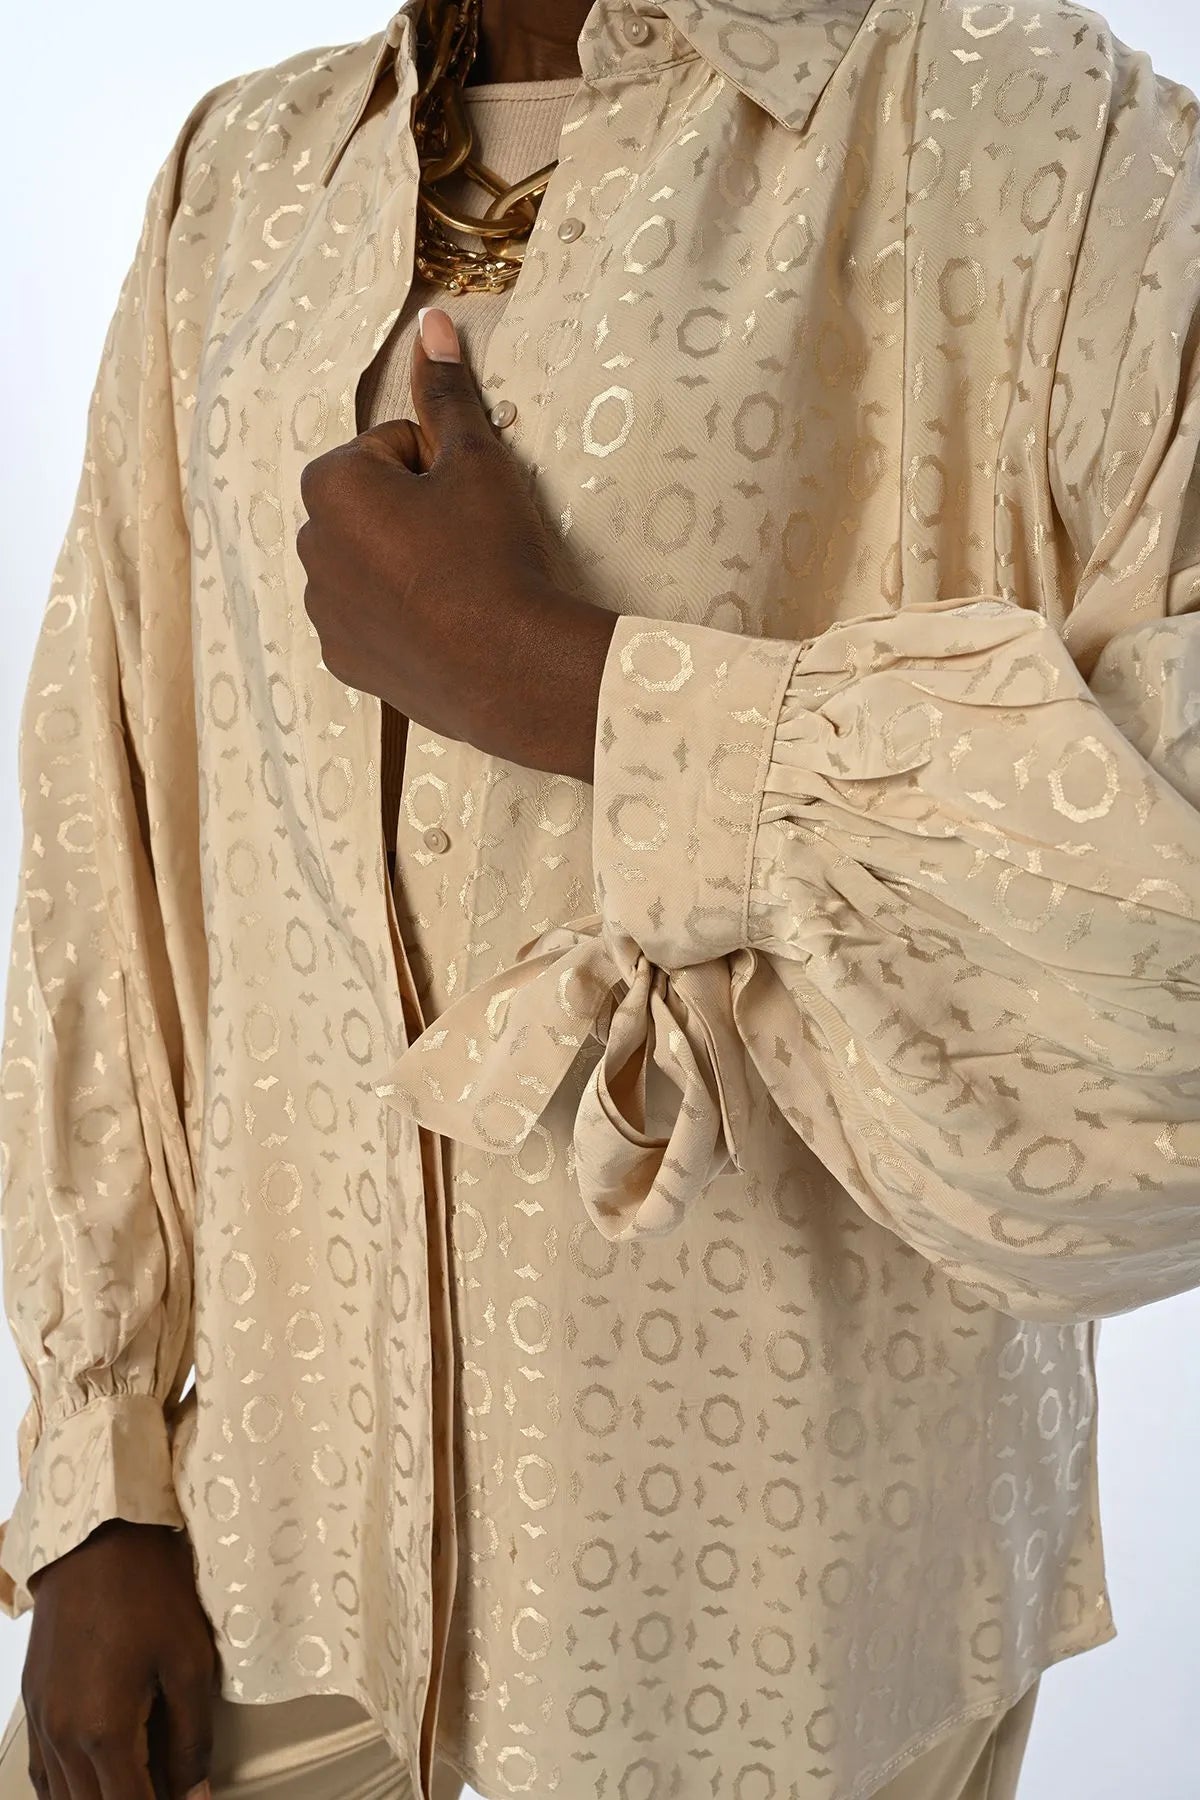 GEOMETRIC PATTERNED BEIGE SHIRT WITH BOUND SLEEVES OVERSIZE FIT - Lebbse